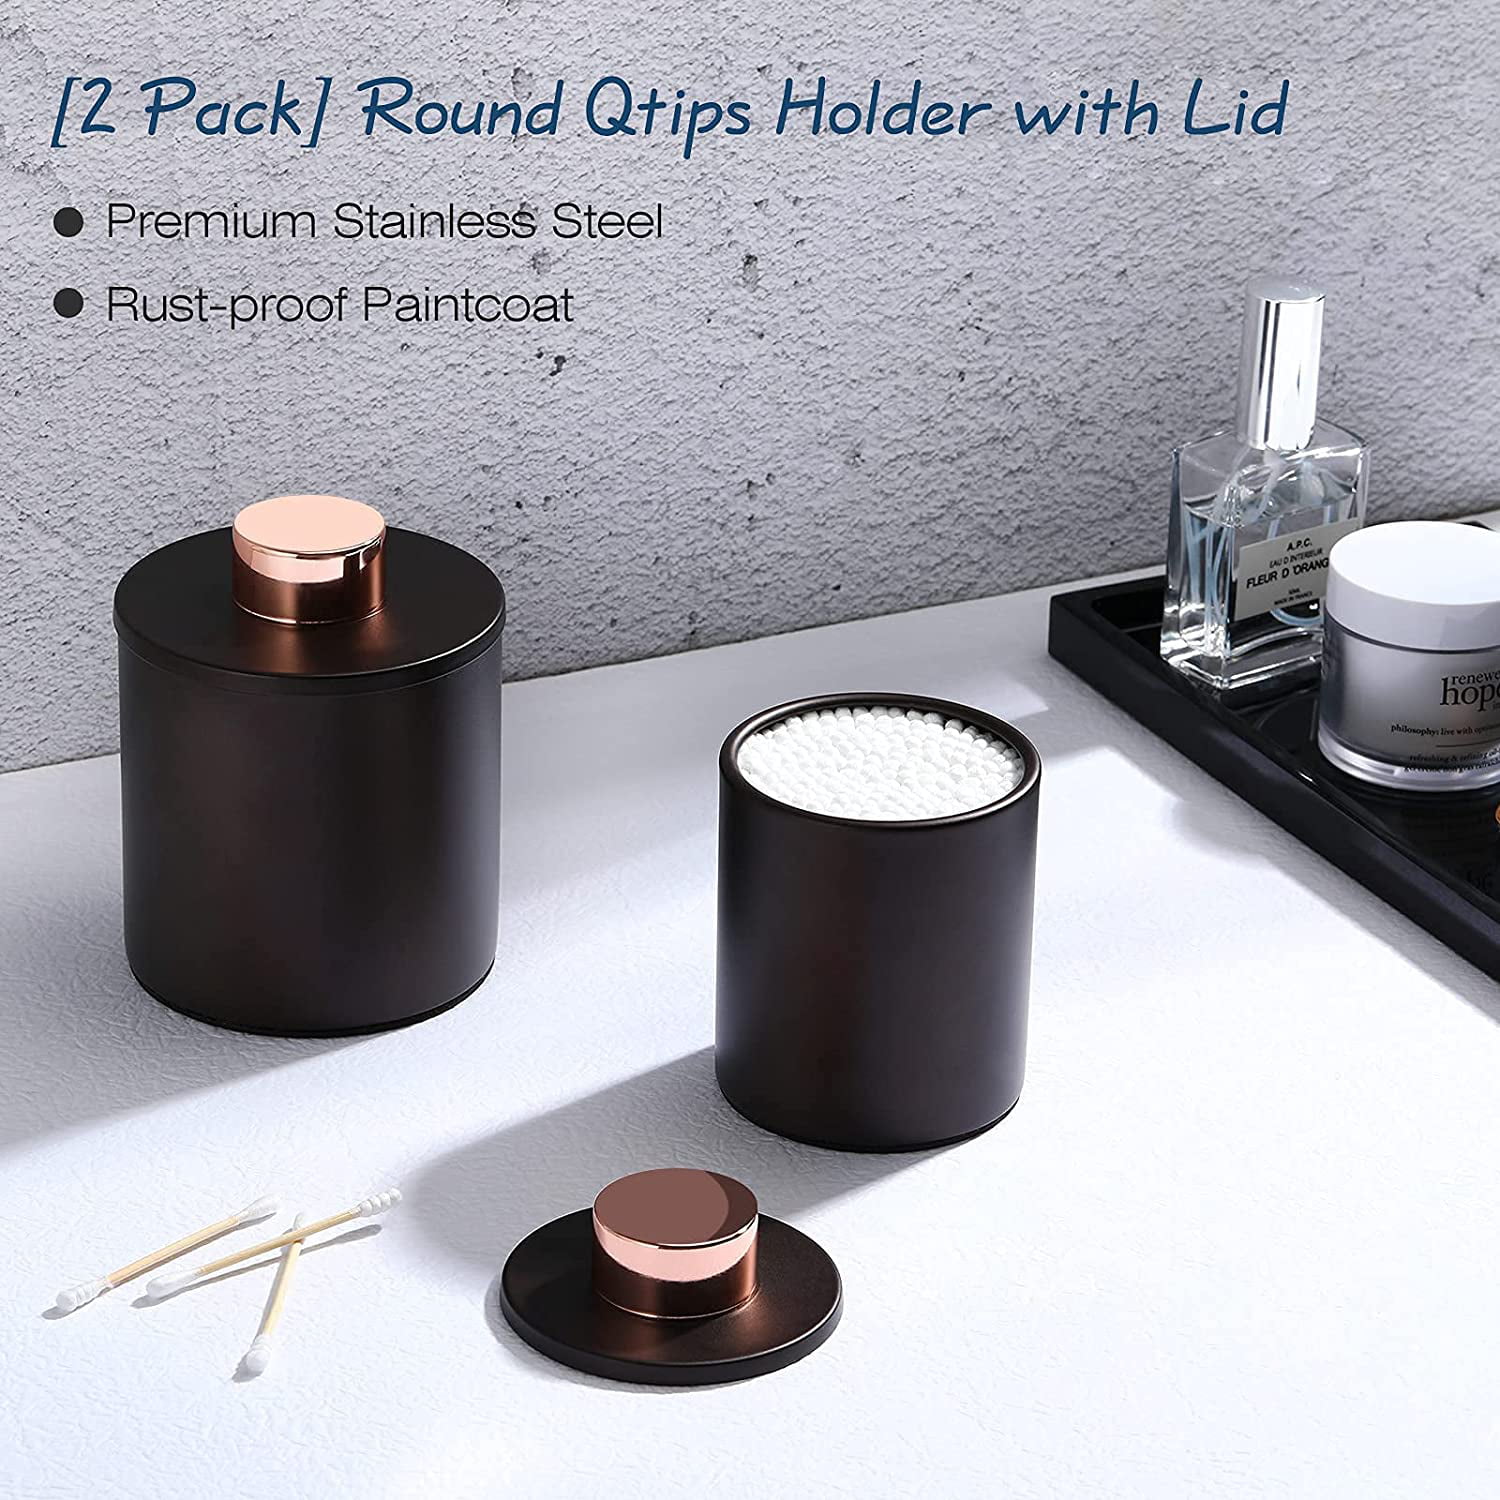 Makeup Sponges Luxpire Qtip Dispenser Holder Box with Lid Balls Hair Accessories- Bronze Rounds Q-tips 2Pck Metal Bathroom Vanity Storage Organizer Canister Apothecary Jars for Cotton Swabs 